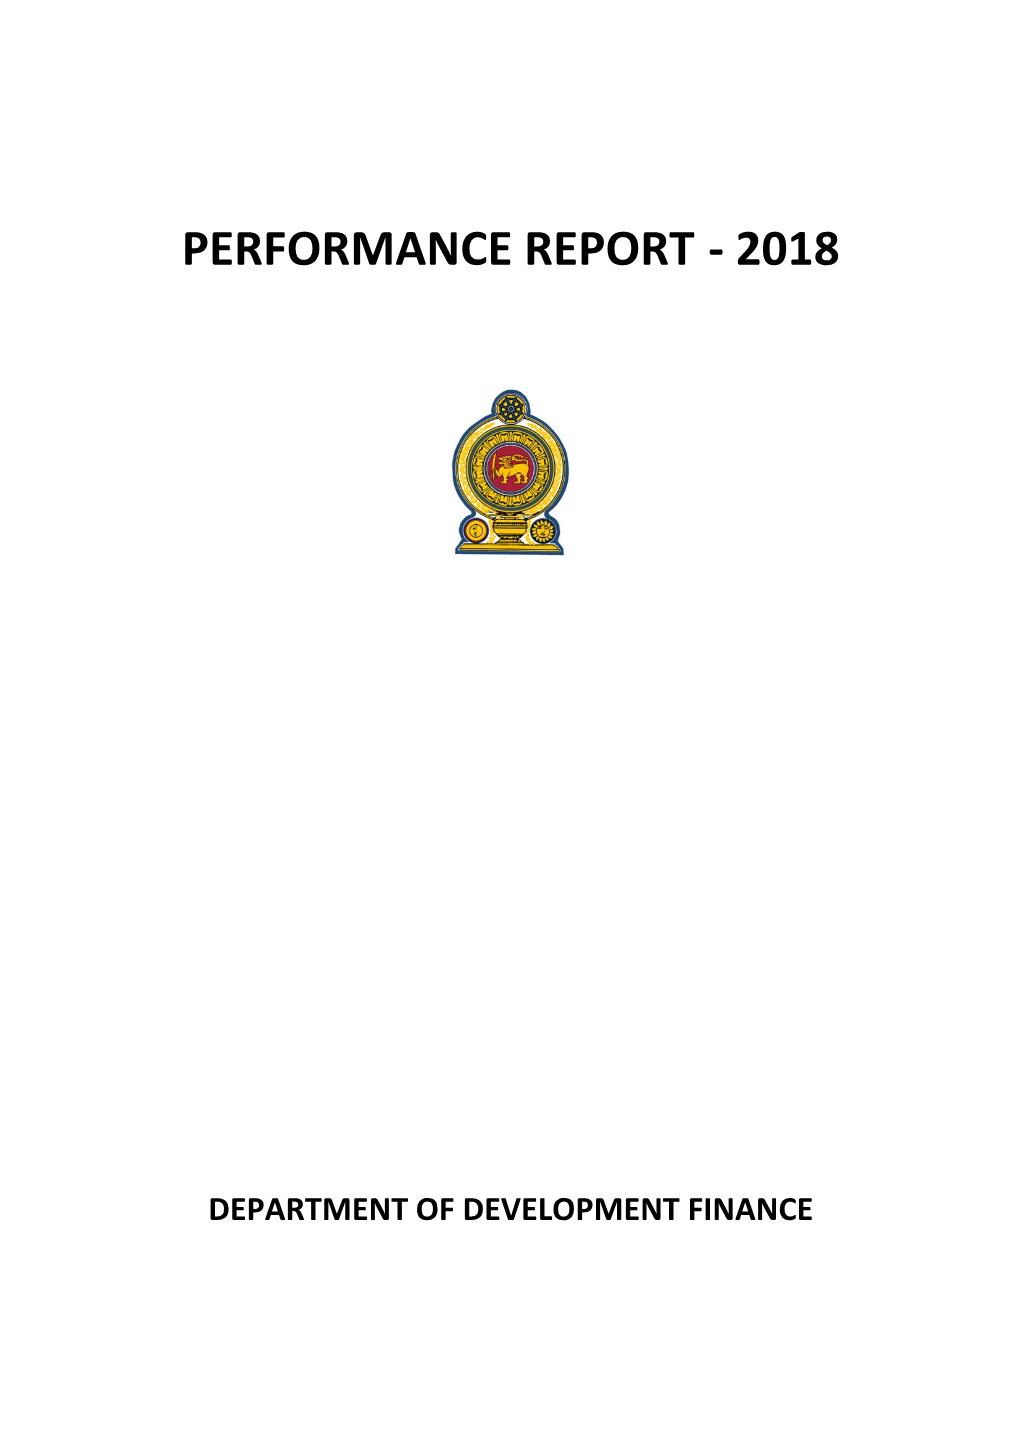 Performance Report of the Department of Development Finance for the Year 2018